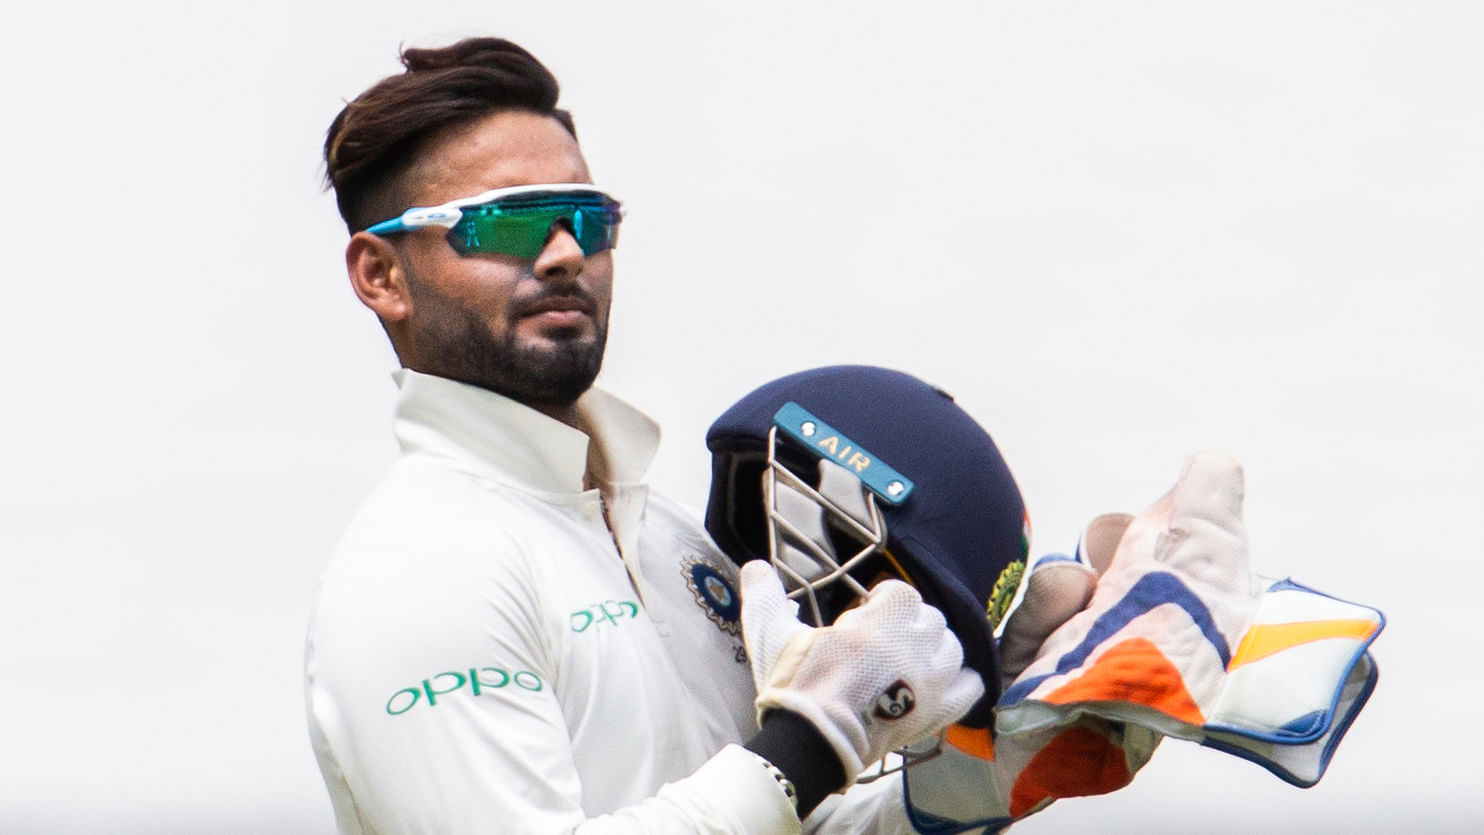 Rishabh Pant became the first Indian wicketkeeper to score a Test century in Australia on Day 2 of the Sydney Test.